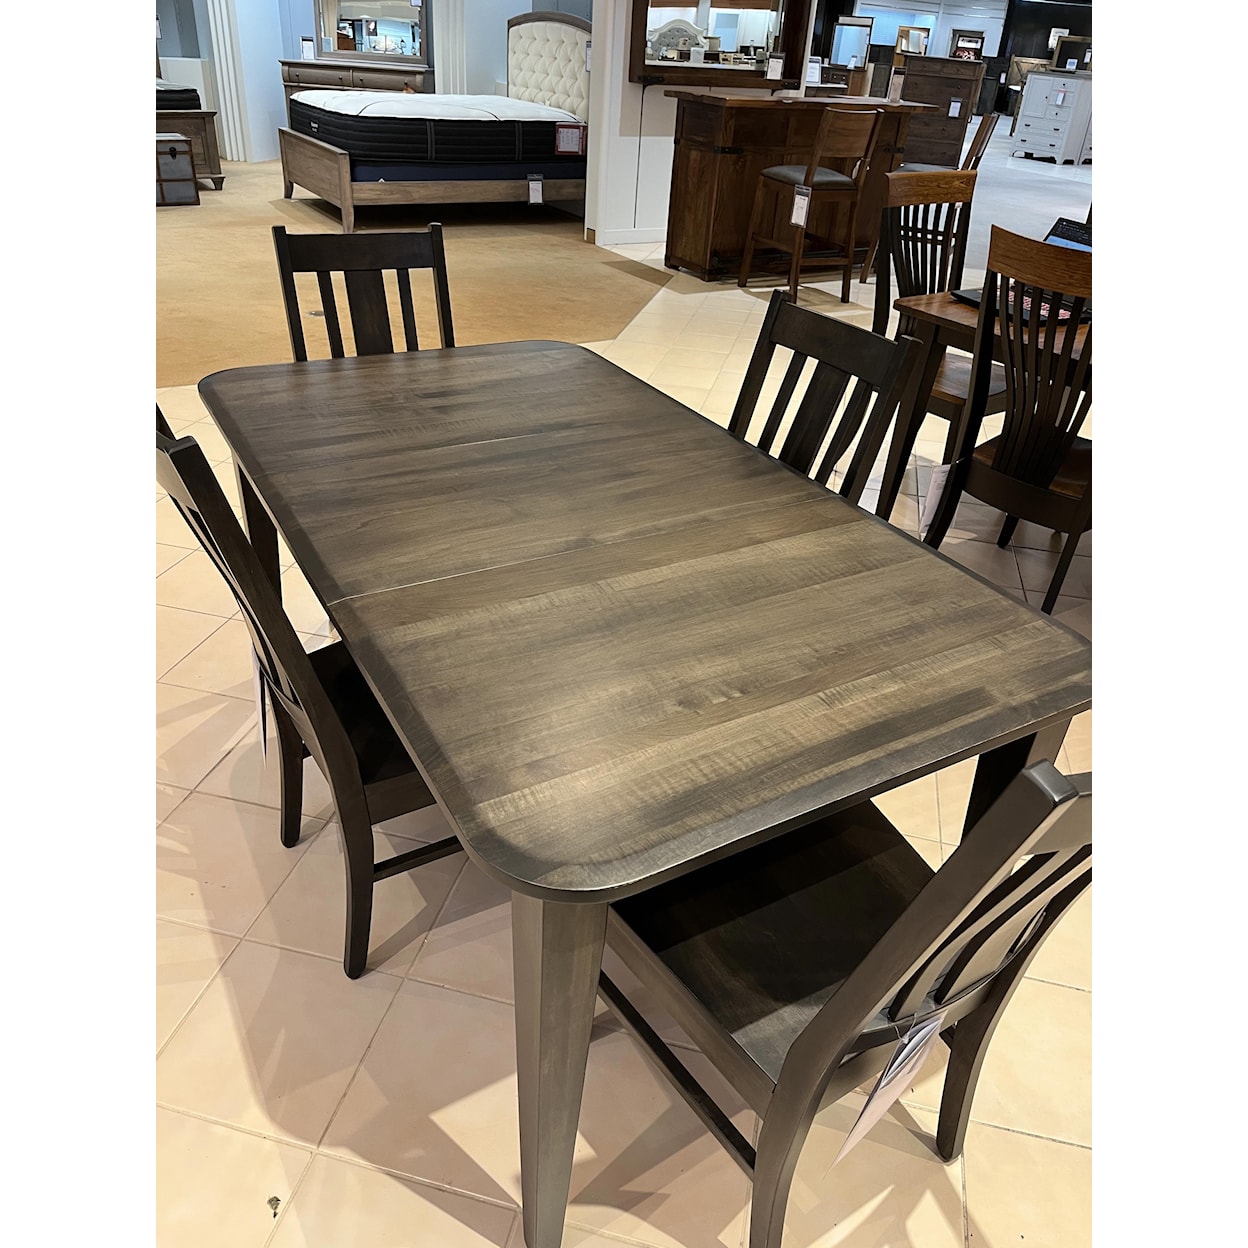 Yutzy - Urban Collection Dining Room Table